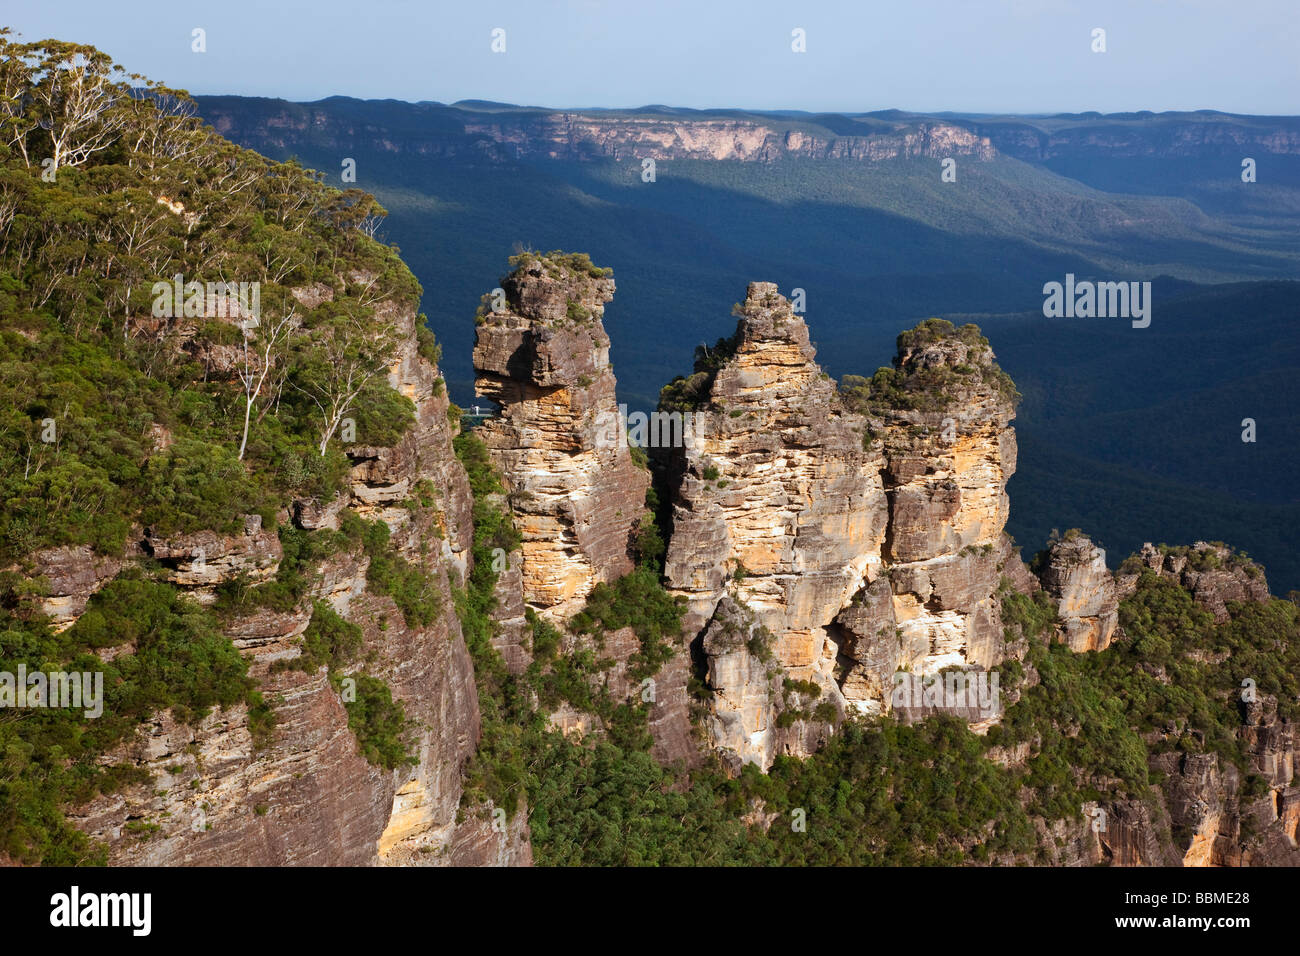 Australia New South Wales. The famous Three Sisters rock formation in the Blue Mountains near Katoomba. Stock Photo